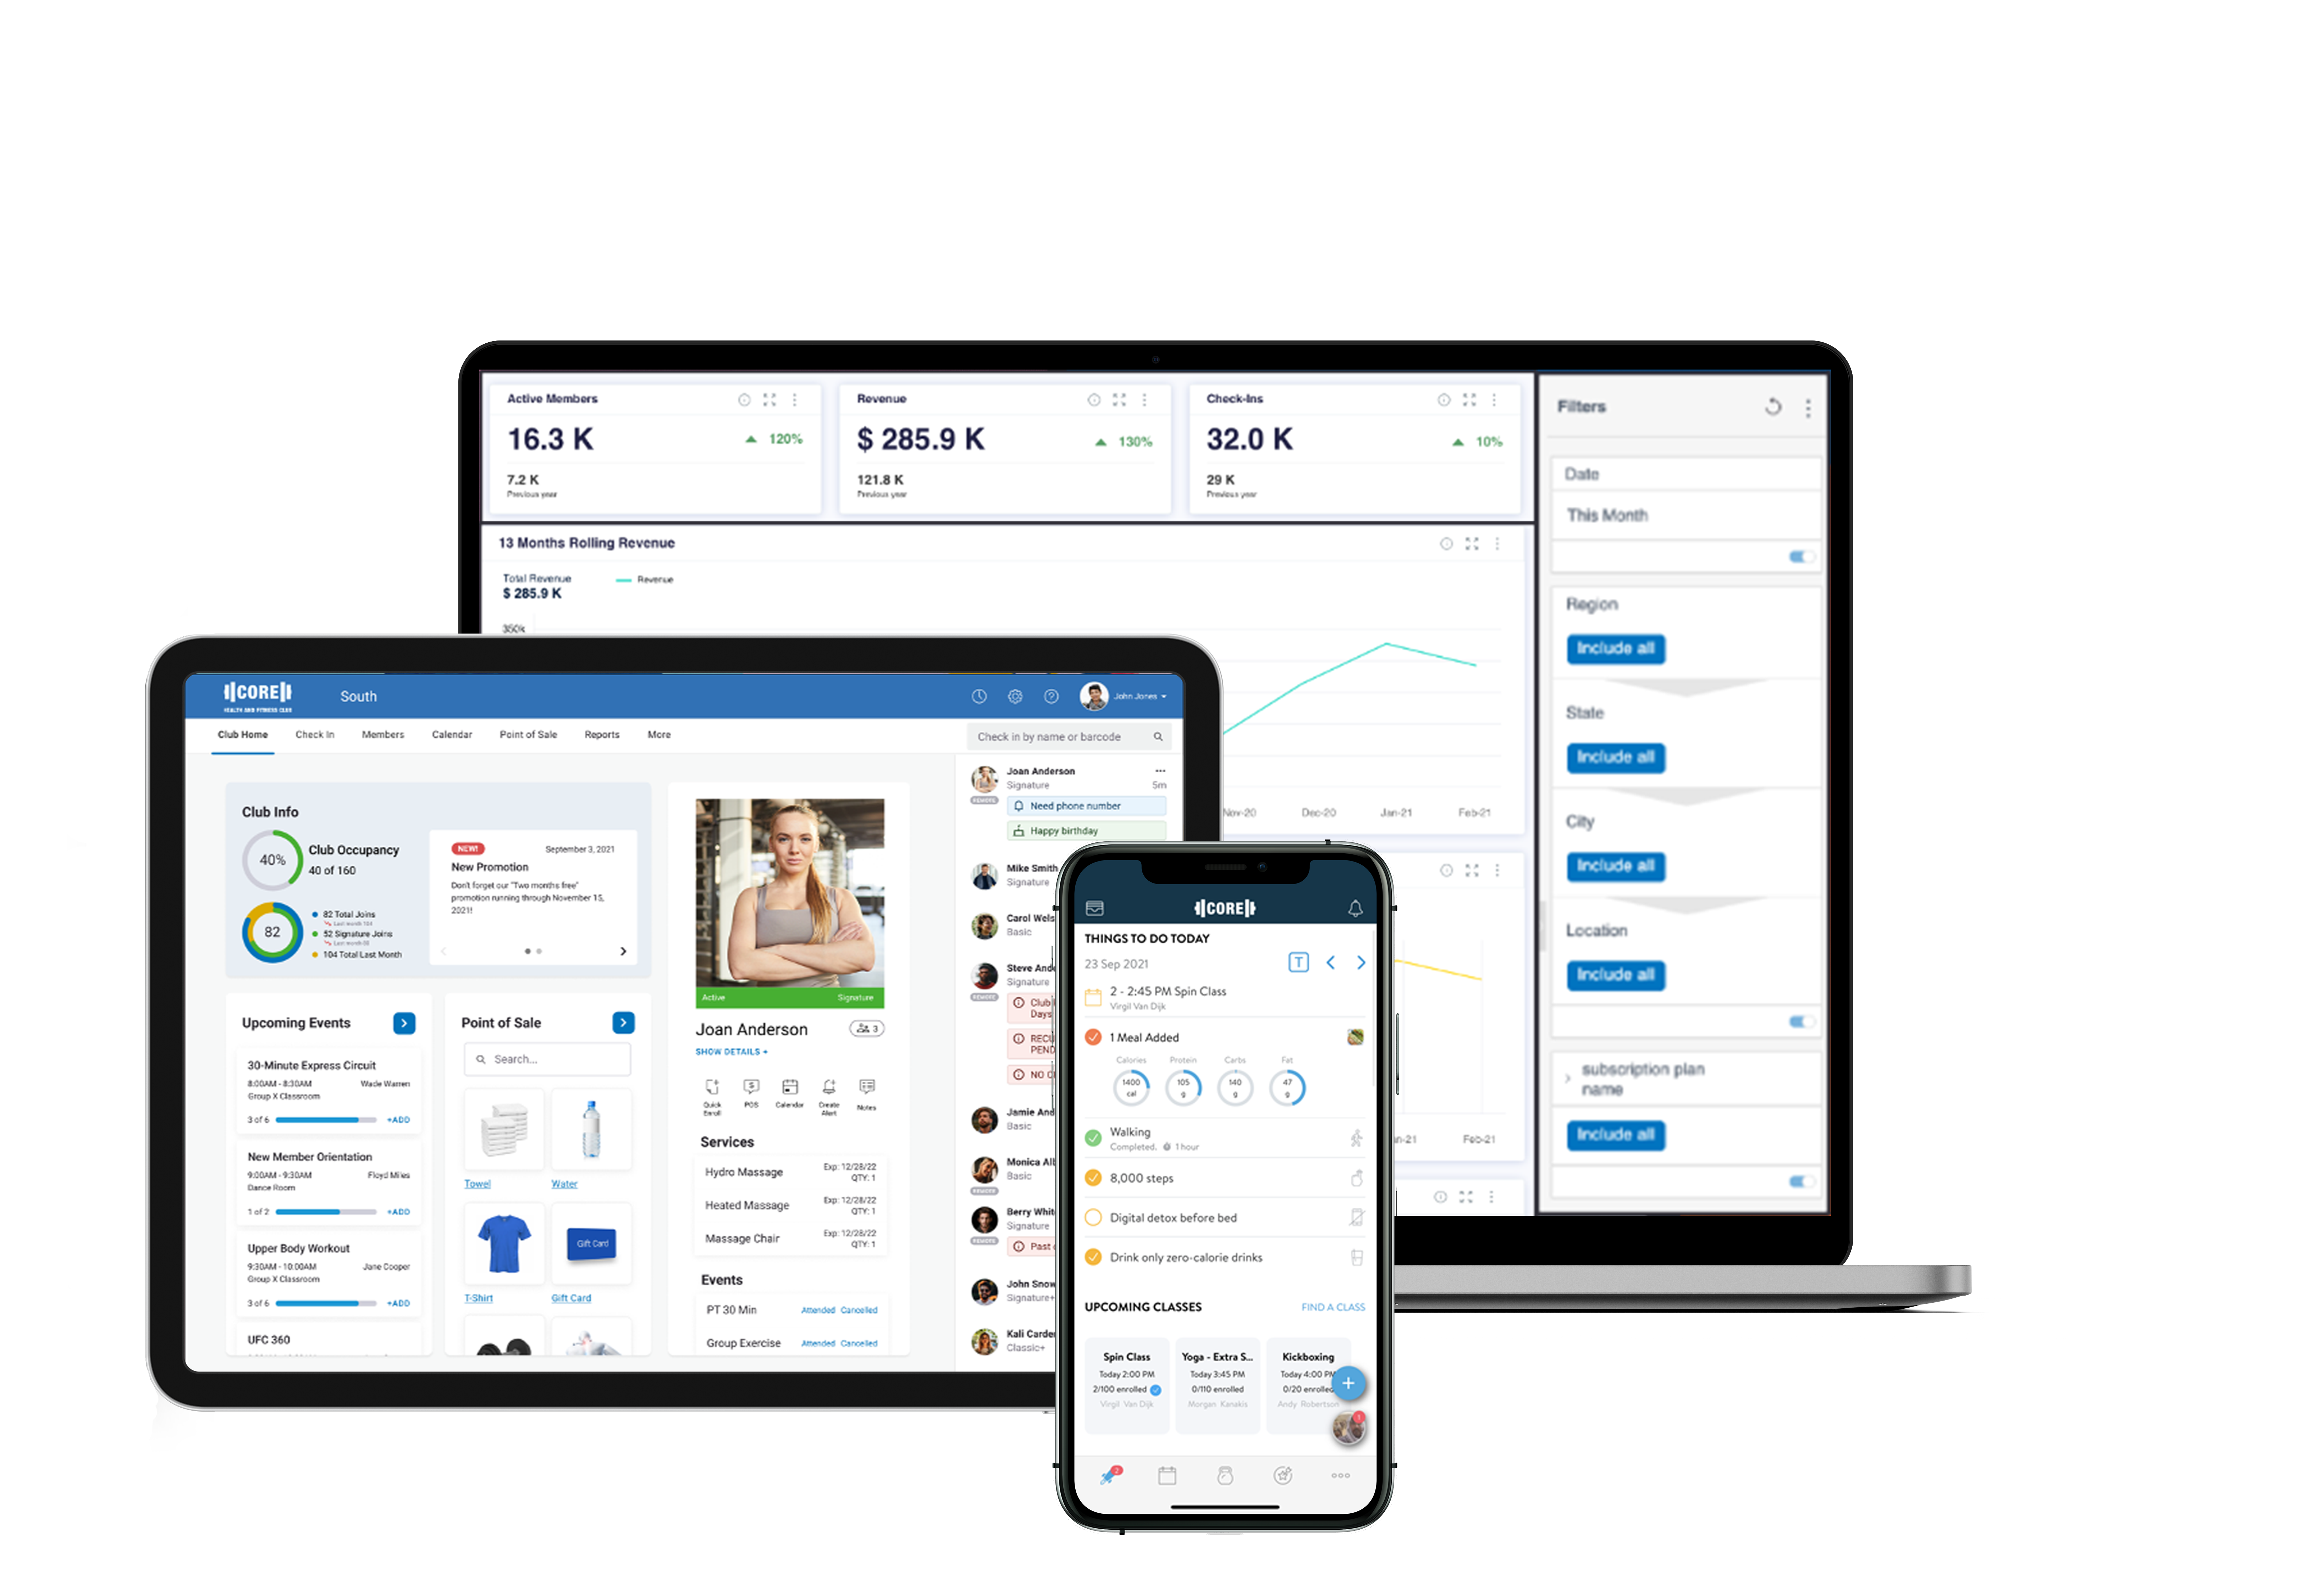 ABC Ignite Software - Multi-Device Support – Our versatile gym management software ensures you can access and manage your gym from multiple devices, providing you with the flexibility you need to stay in control anytime, anywhere.